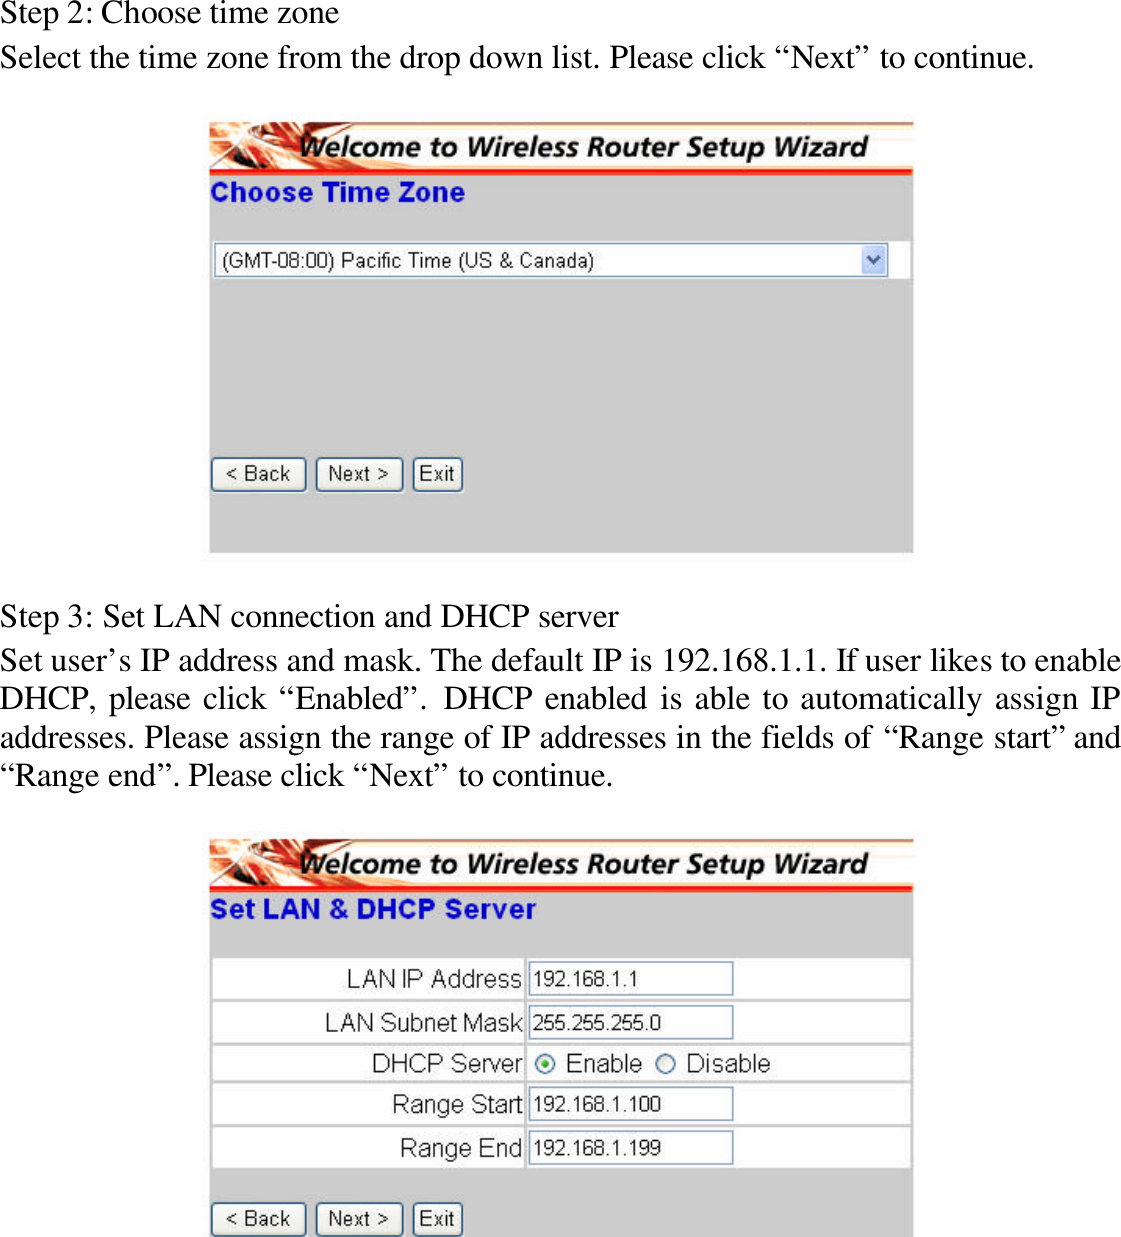 Step 2: Choose time zone Select the time zone from the drop down list. Please click “Next” to continue.    Step 3: Set LAN connection and DHCP server Set user’s IP address and mask. The default IP is 192.168.1.1. If user likes to enable DHCP, please click “Enabled”. DHCP enabled is able to automatically assign IP addresses. Please assign the range of IP addresses in the fields of “Range start” and “Range end”. Please click “Next” to continue.   